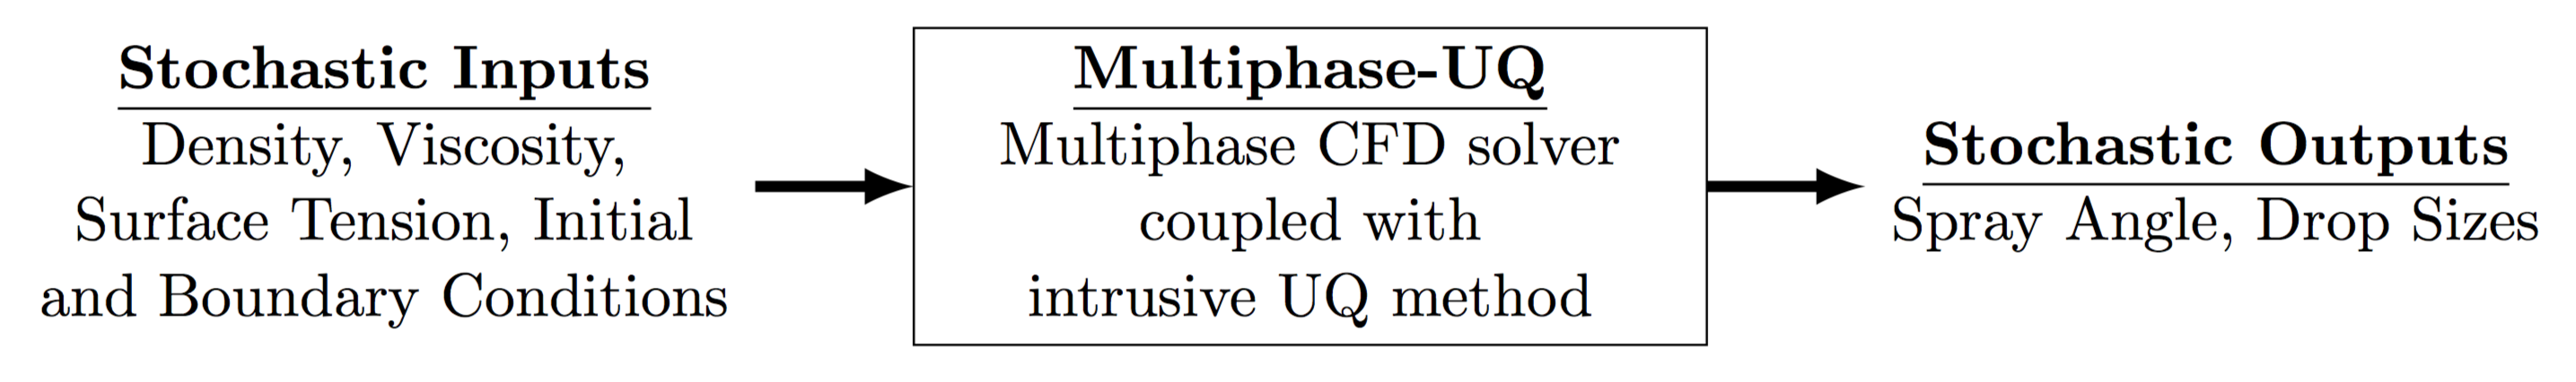 multiphase uncertainty quantificaation overview